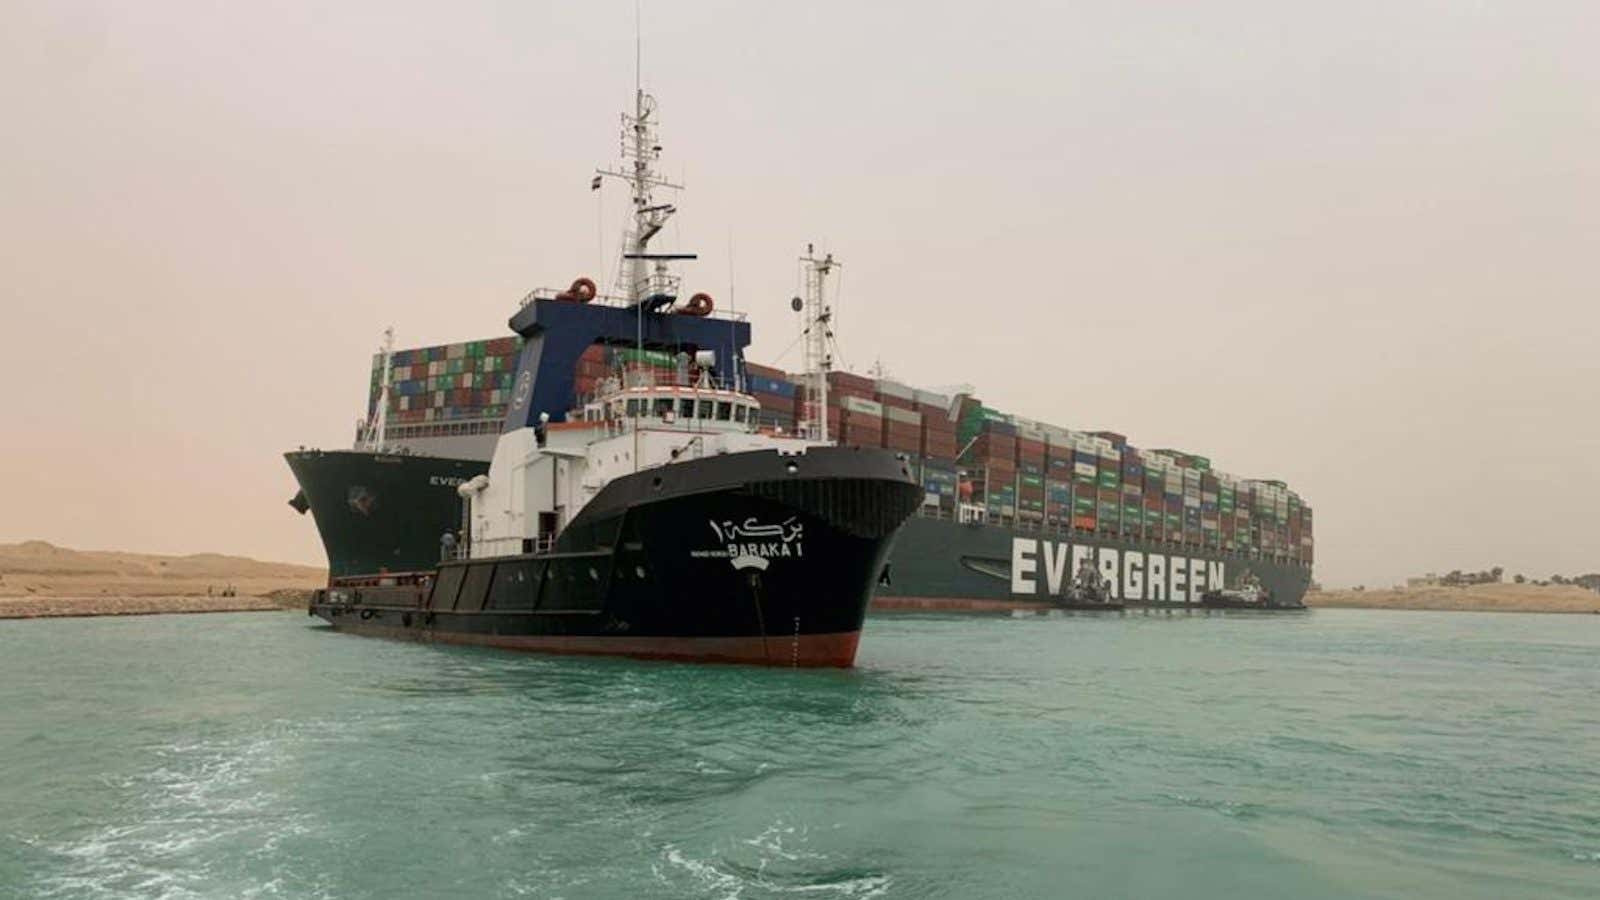 The Ever Given container ship is stuck in the Suez after a strong wind pushed it aground.